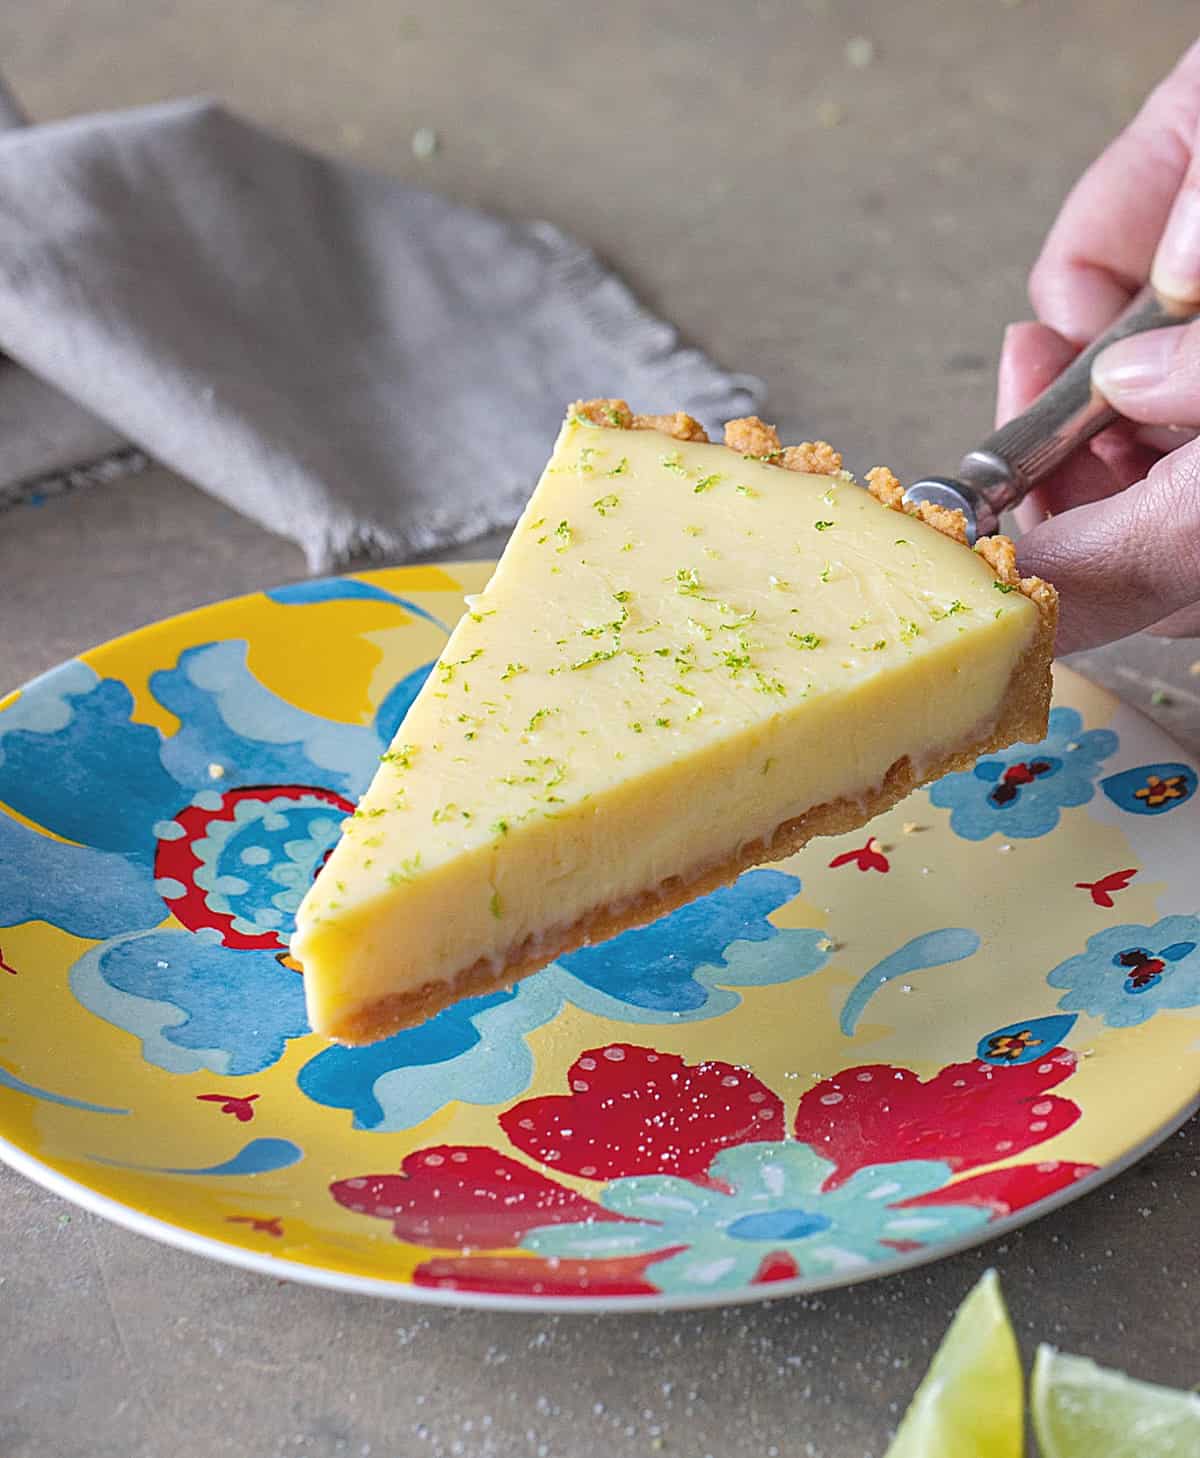 Slice of lime pie, colorful plate